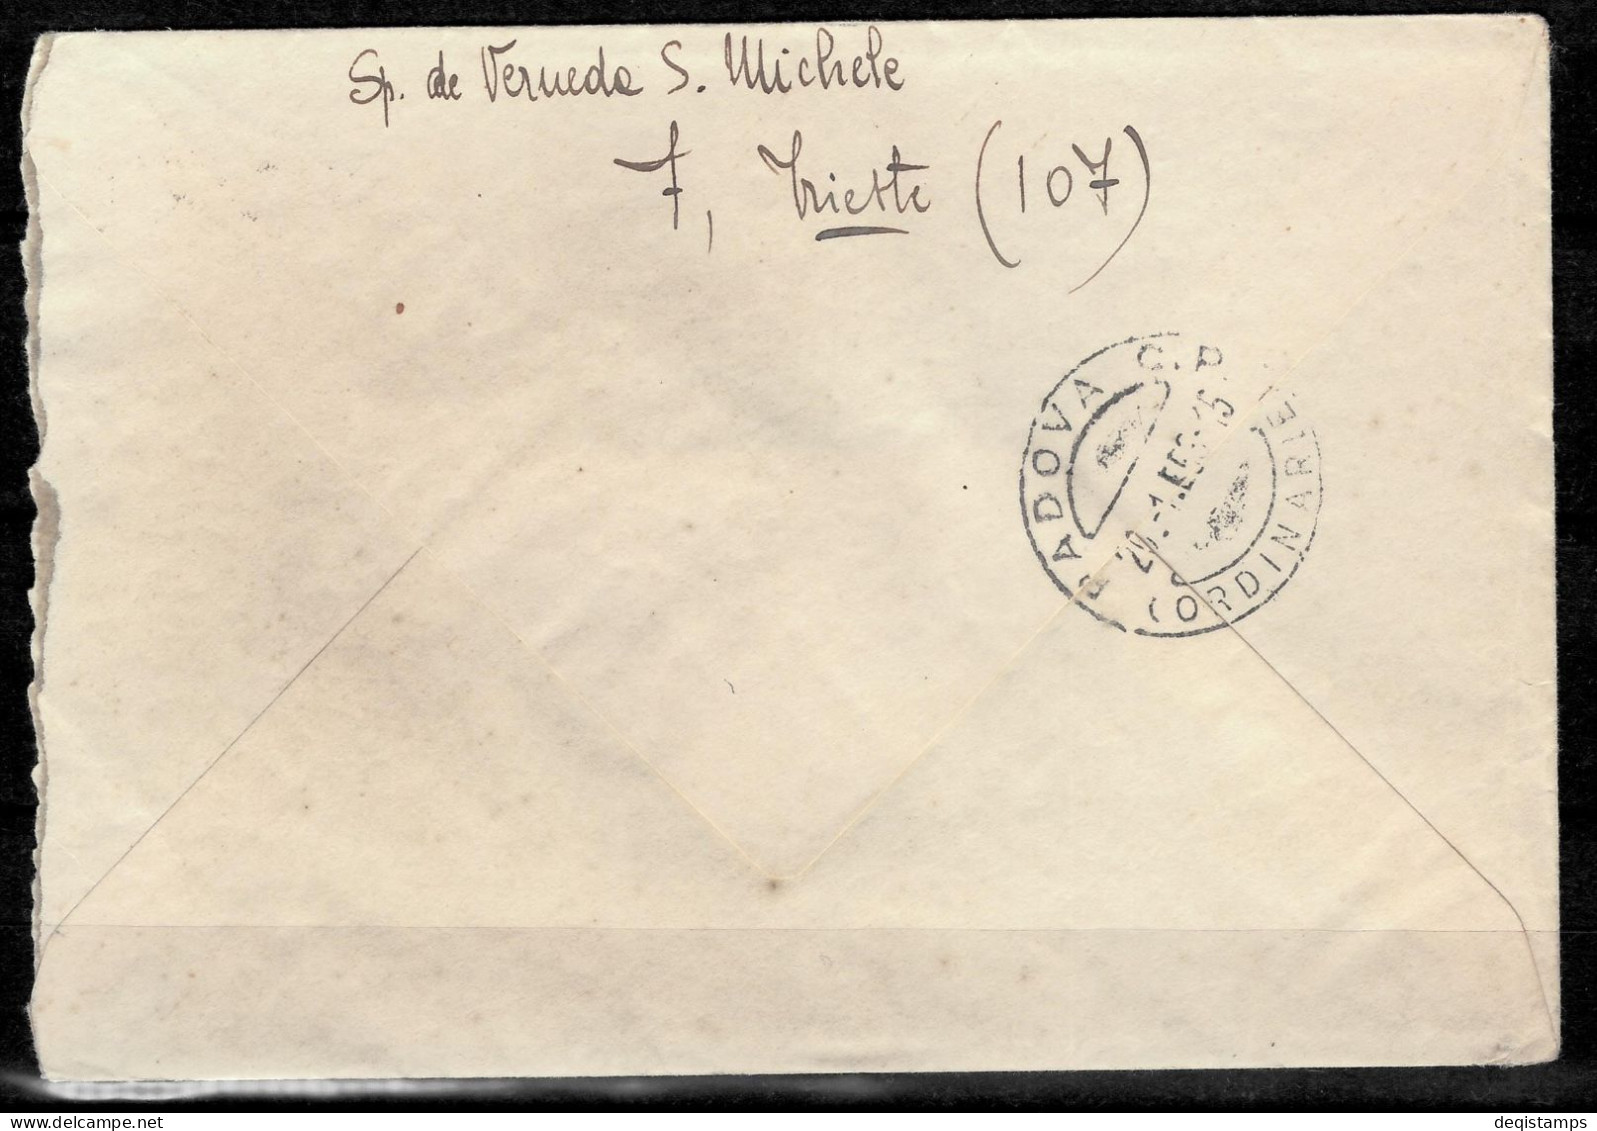 Italy / Trieste A Year 1953  AMG - FTT  Cover - Jugoslawische Bes.: Triest